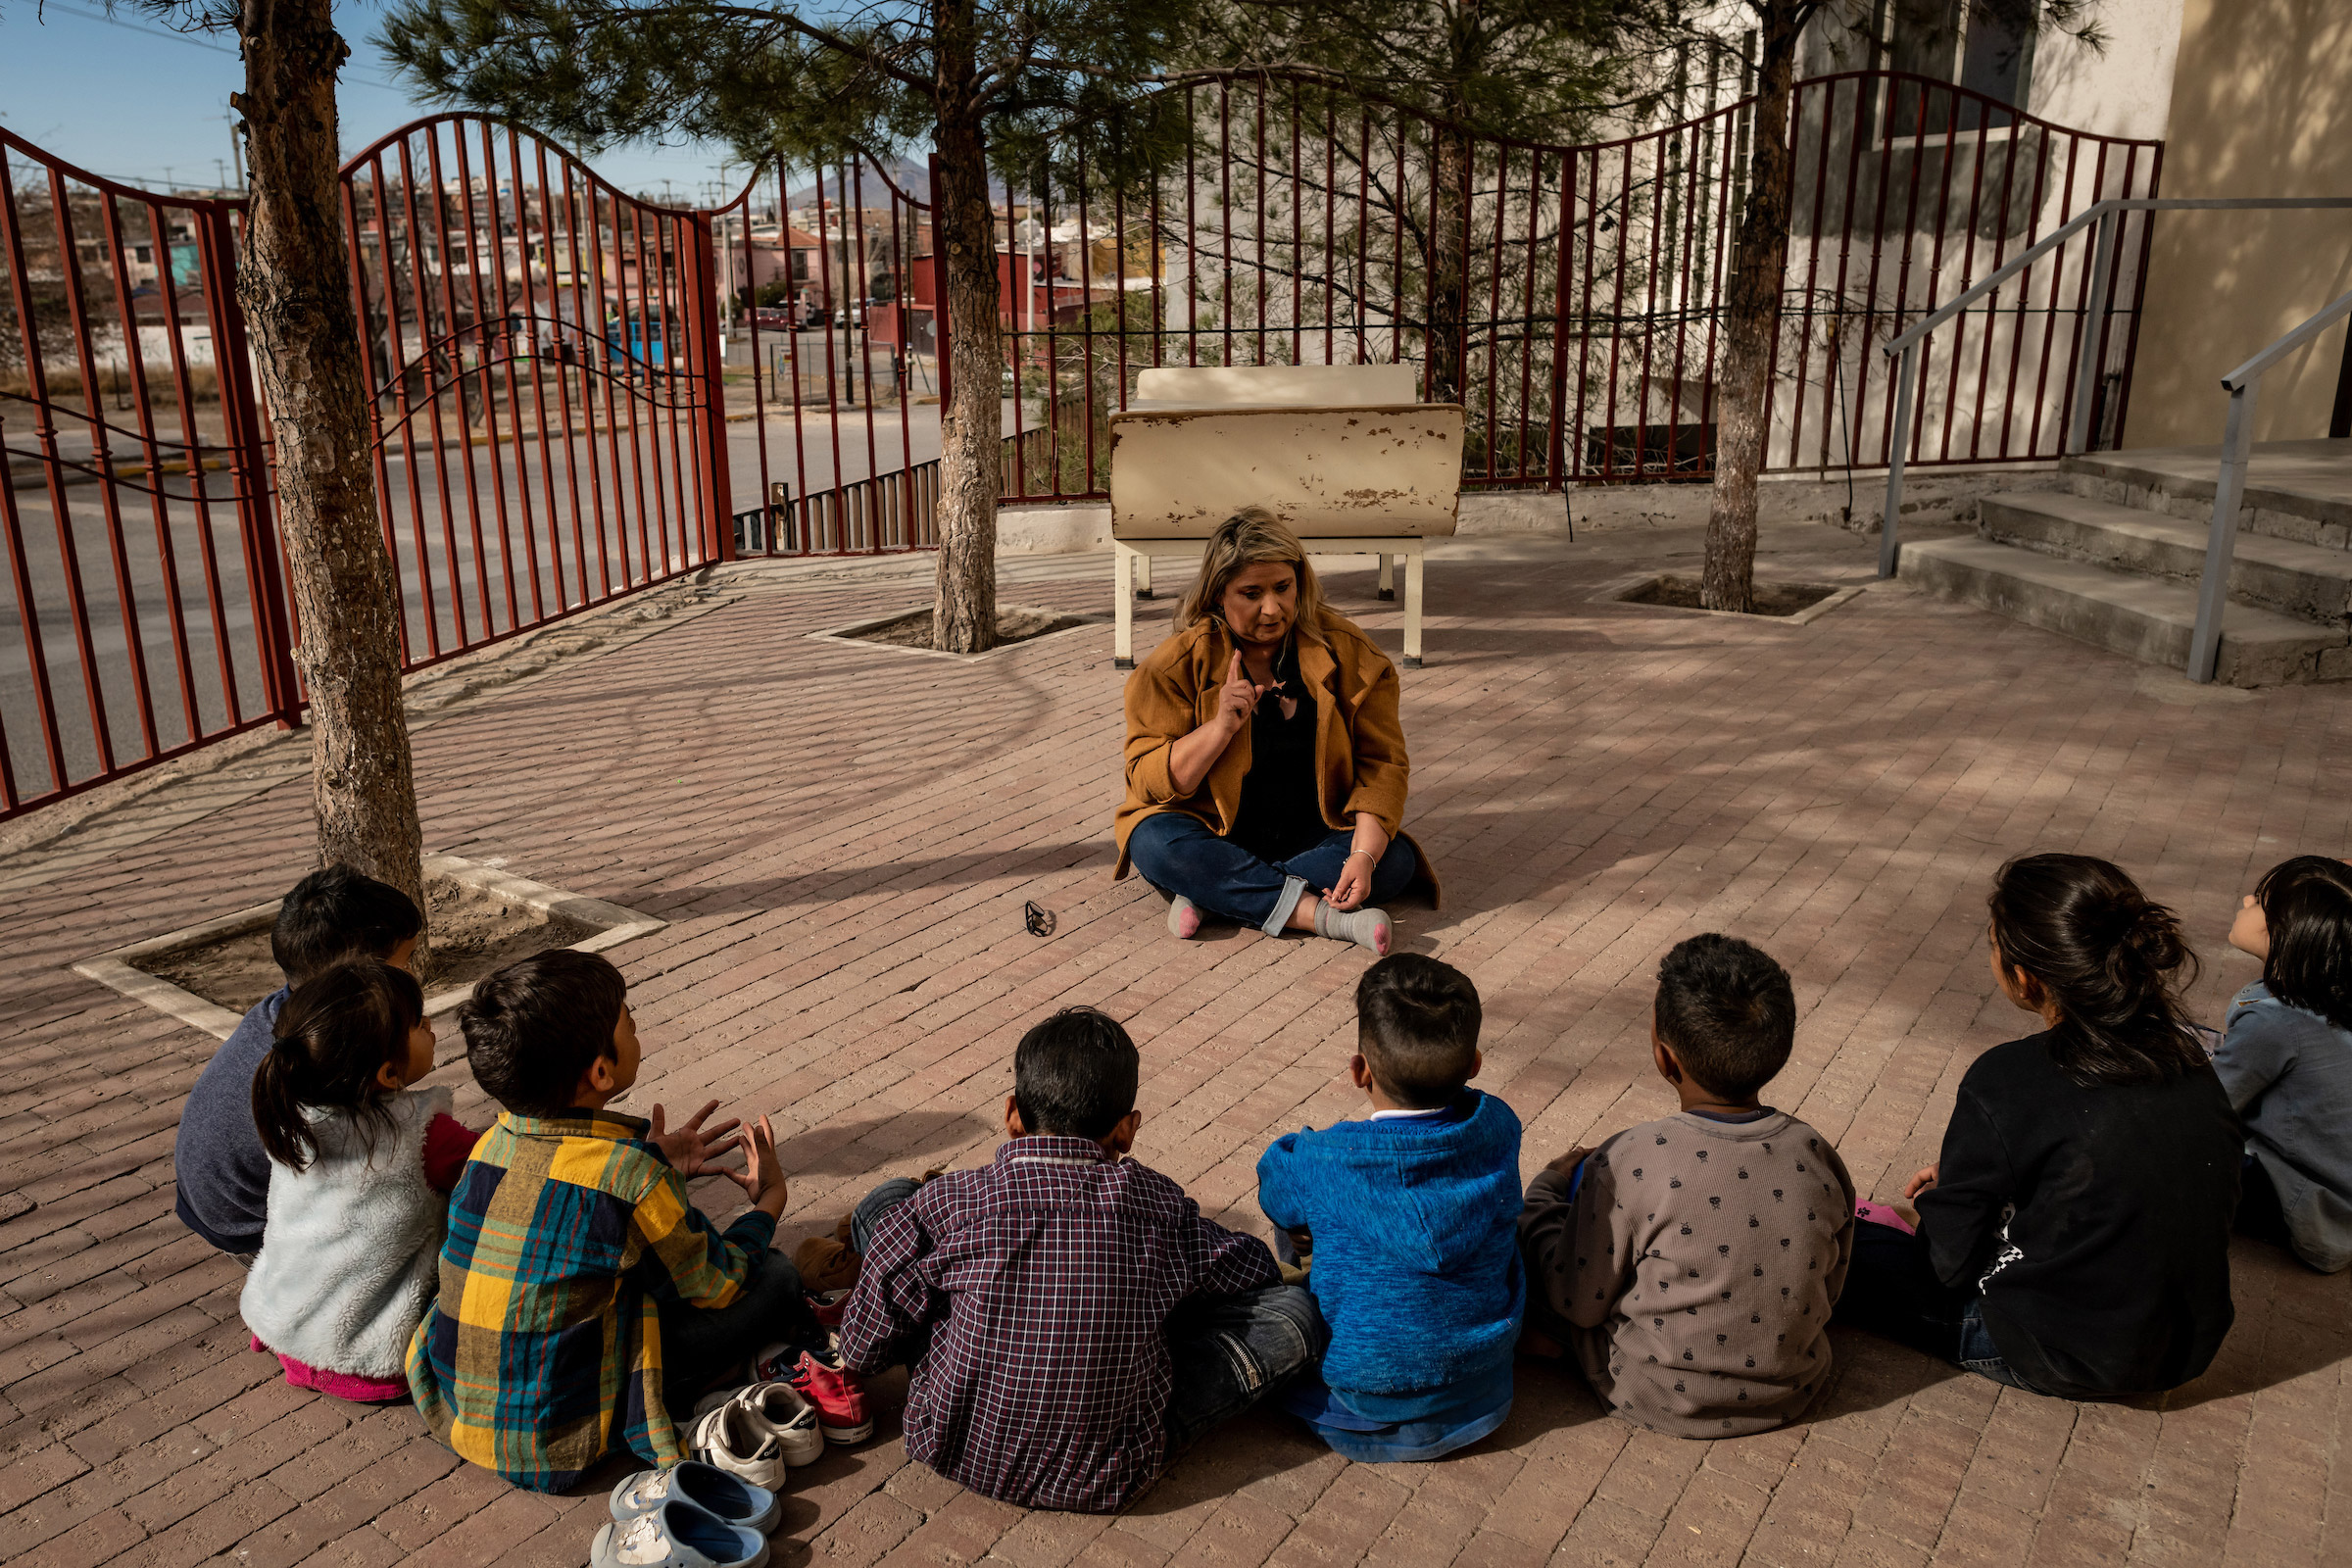 Psychologist Patricia Galarza leads a group therapy session about how to say goodbye to your friends with the children living at the <a href="https://time.com/5942119/pregnant-asylum-seekers-border-clinic/">San Juan Apóstol migrant shelter</a>. (Meridith Kohut for TIME)